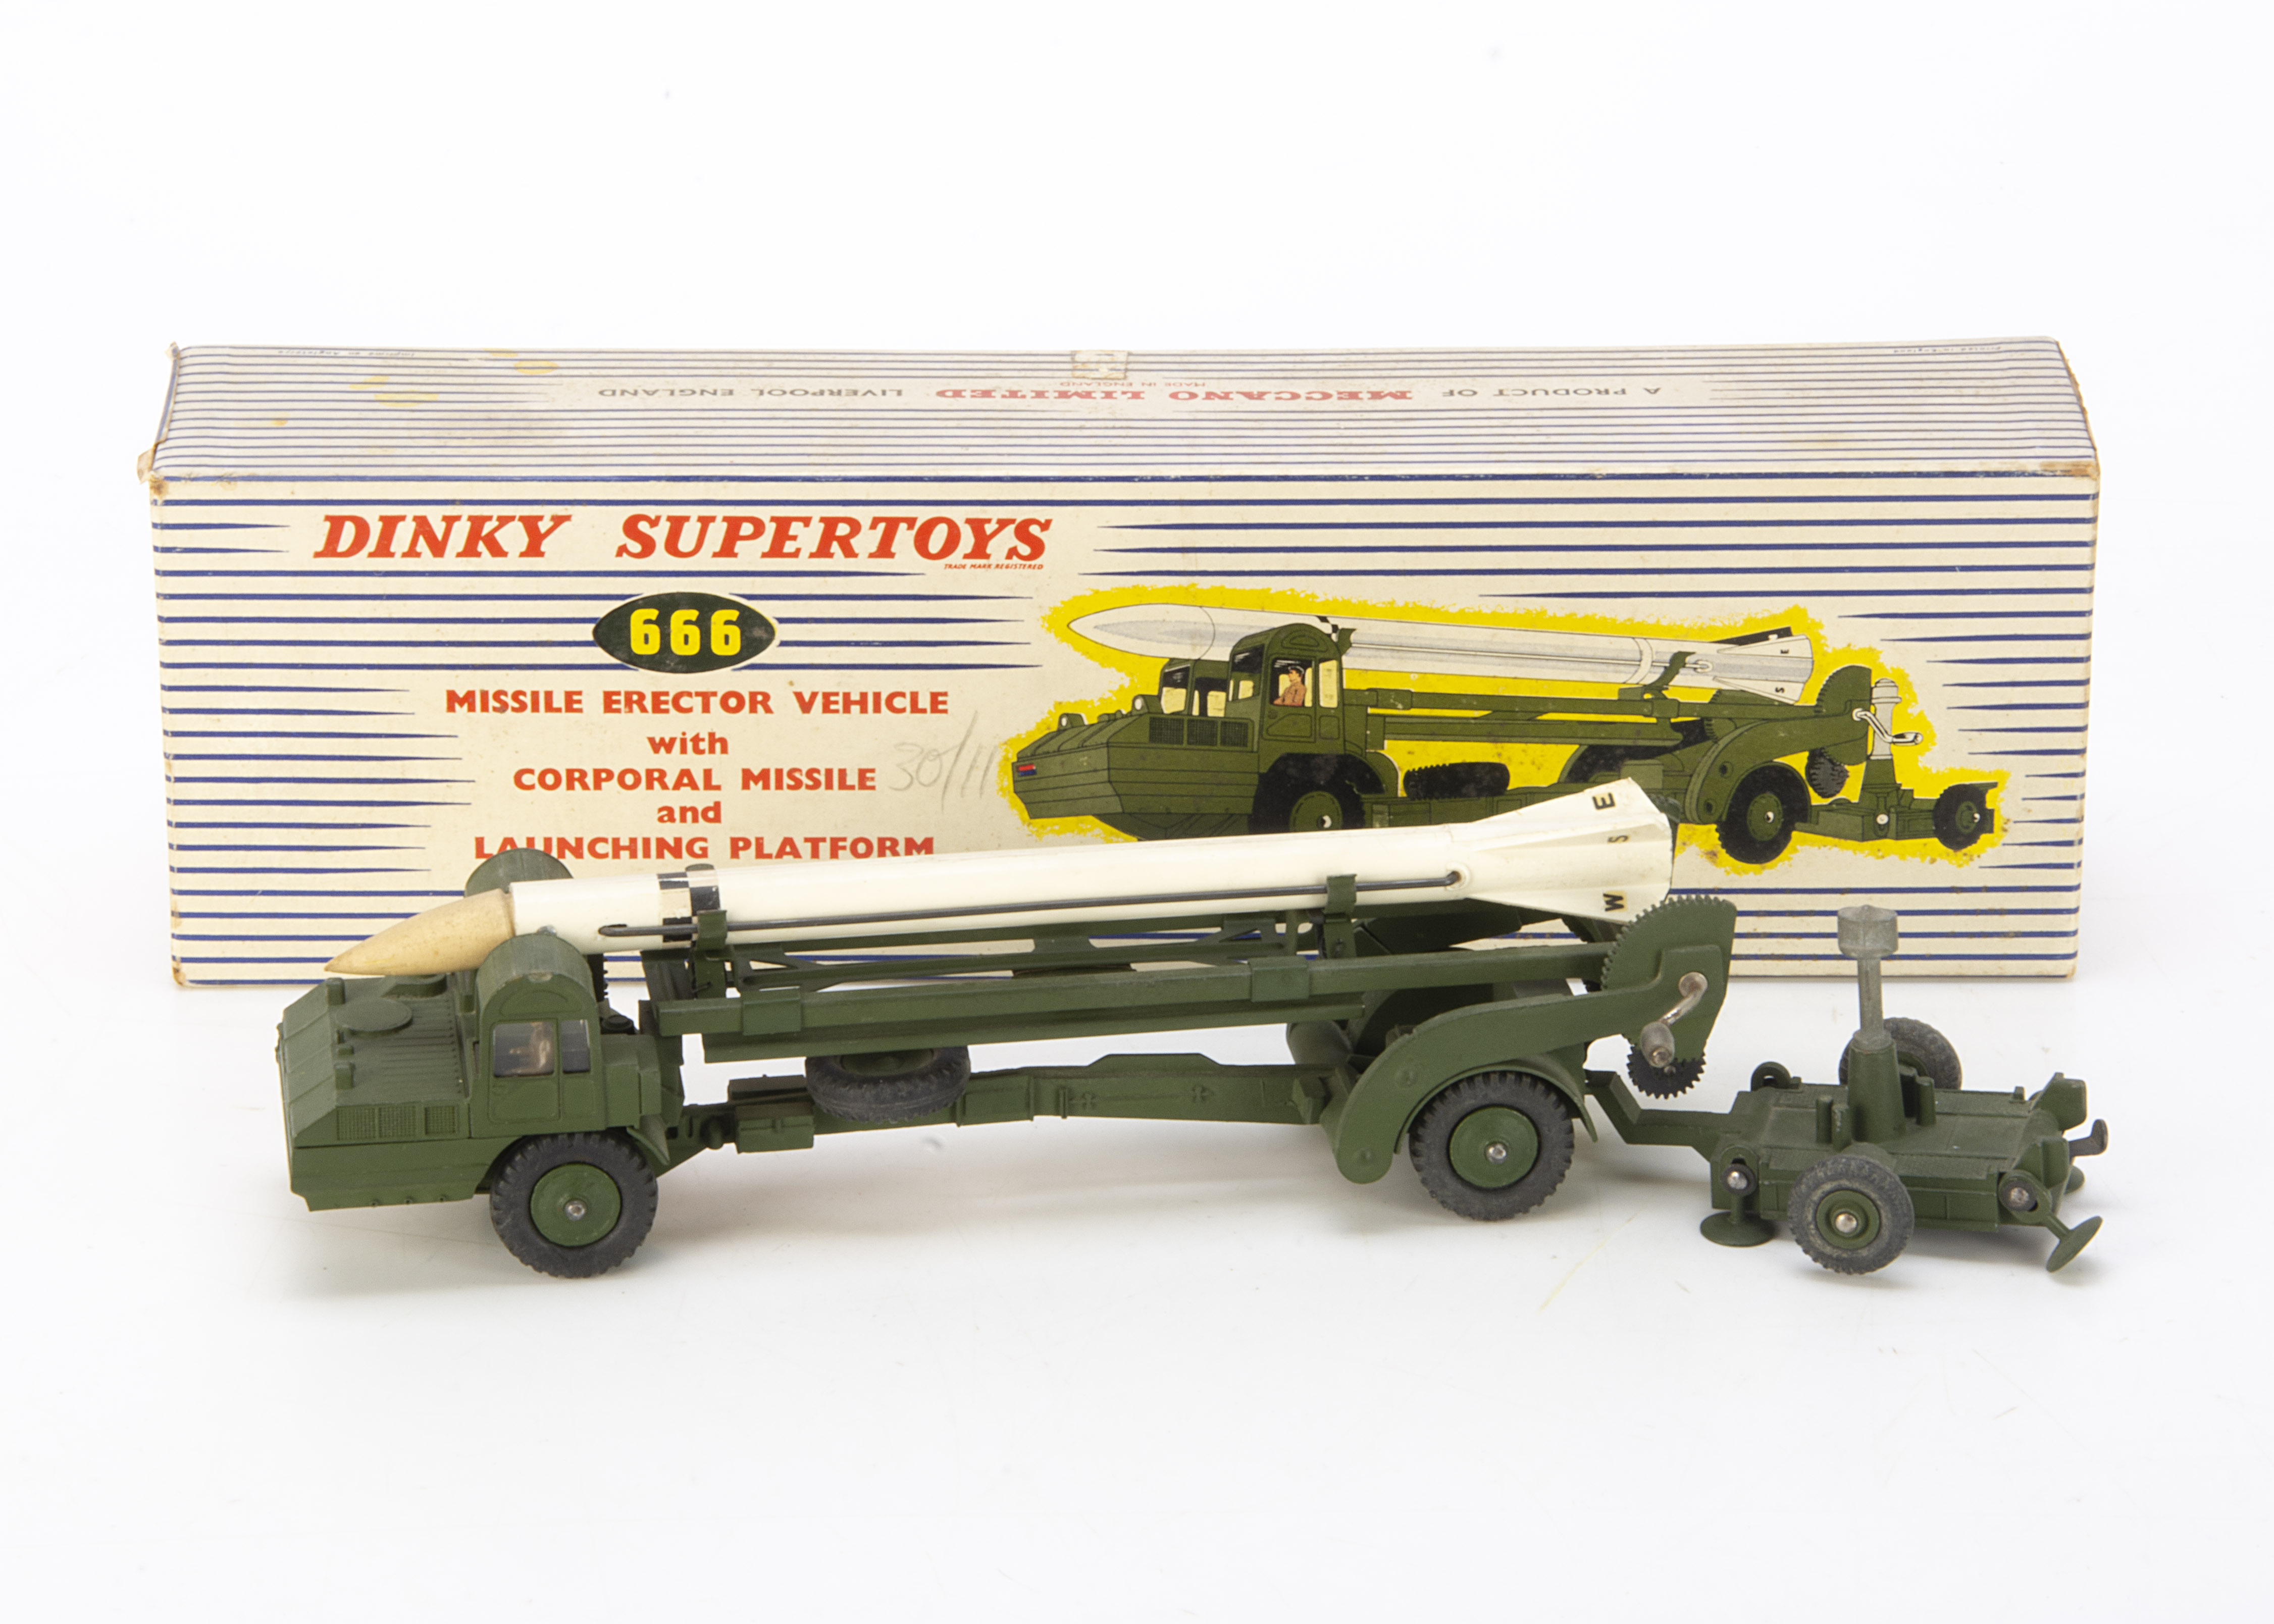 A Dinky Supertoys 666 Missile Erector Vehicle, with Corporal Missile and Launching Platform, in